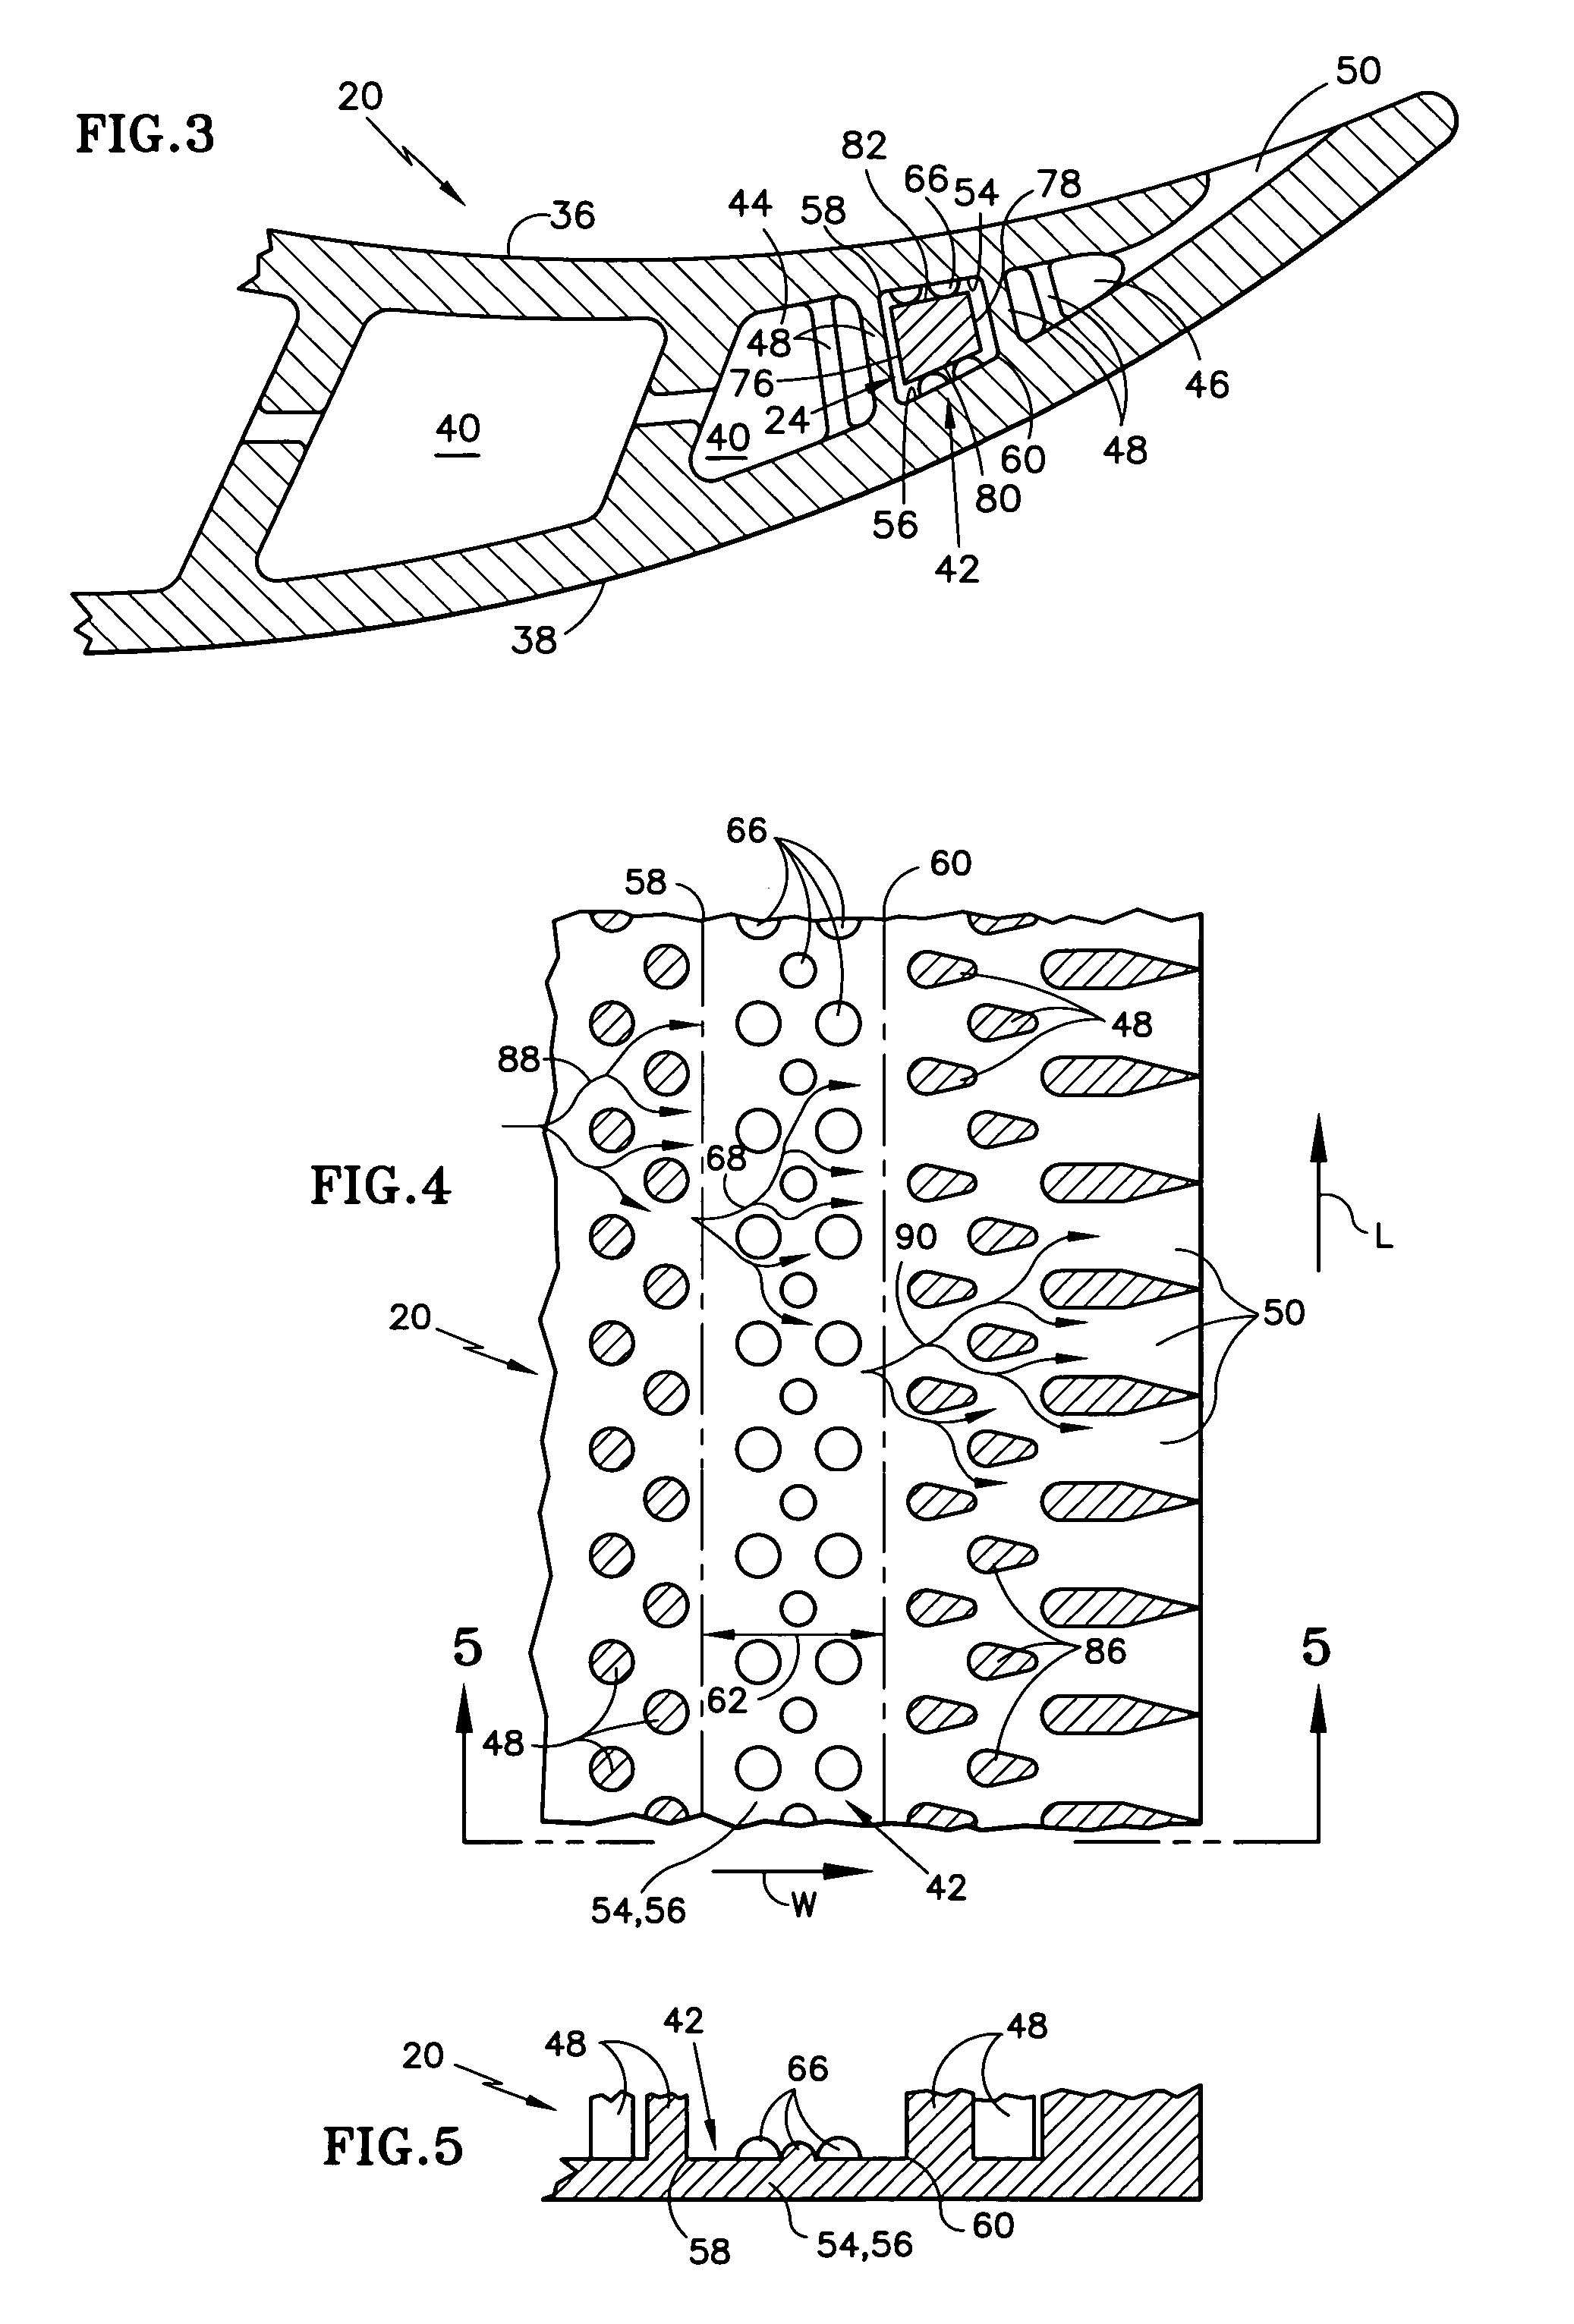 Cooled rotor blade with vibration damping device